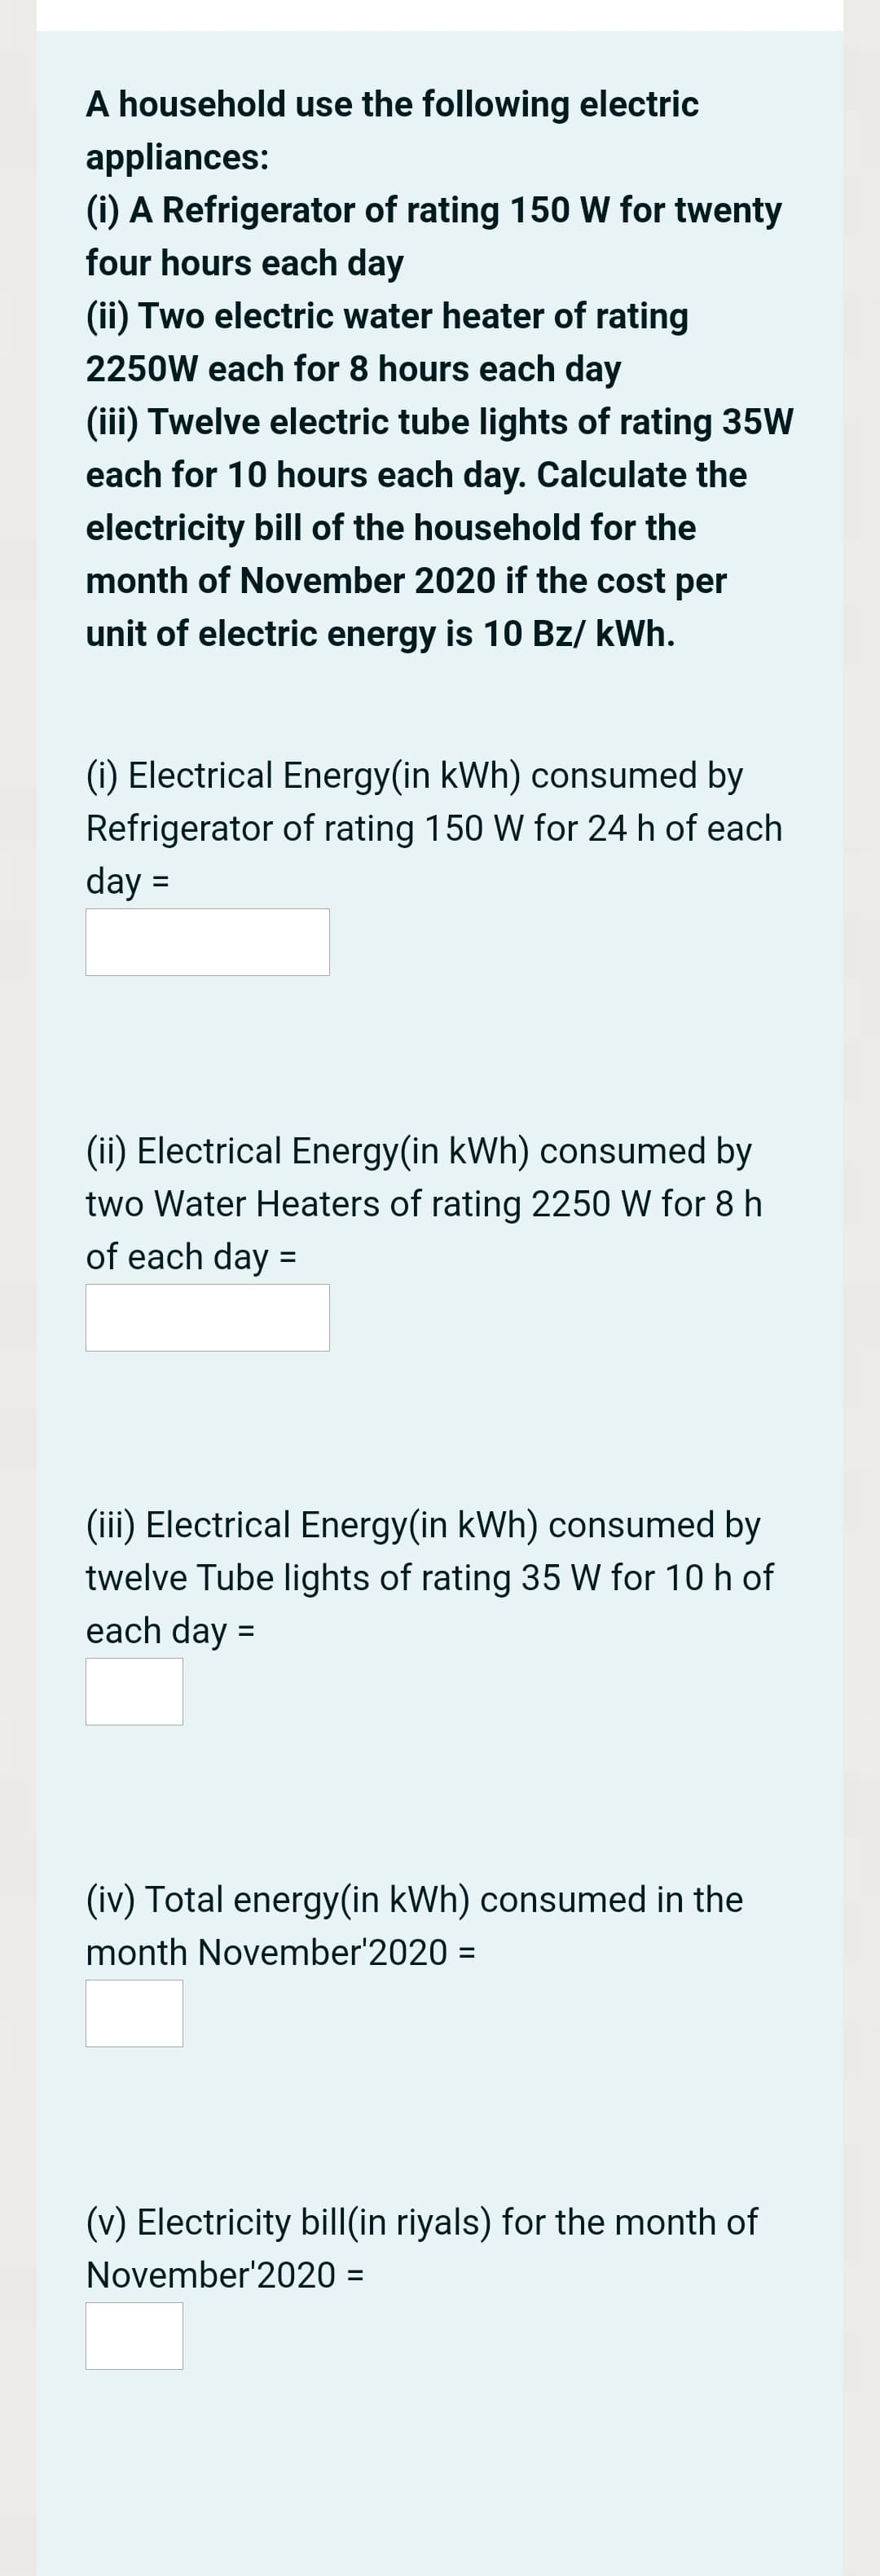 A household use the following electric
appliances:
(i) A Refrigerator of rating 150 W for twenty
four hours each day
(ii) Two electric water heater of rating
2250W each for 8 hours each day
(iii) Twelve electric tube lights of rating 35W
each for 10 hours each day. Calculate the
electricity bill of the household for the
month of November 2020 if the cost per
unit of electric energy is 10 Bz/ kWh.
(i) Electrical Energy(in kWh) consumed by
Refrigerator of rating 150 W for 24 h of each
day =
(ii) Electrical Energy(in kWh) consumed by
two Water Heaters of rating 2250 W for 8 h
of each day =
(iii) Electrical Energy(in kWh) consumed by
twelve Tube lights of rating 35 W for 10 h of
each day =
(iv) Total energy(in kWh) consumed in the
month November'2020 =
(v) Electricity bill(in riyals) for the month of
November'2020 =
